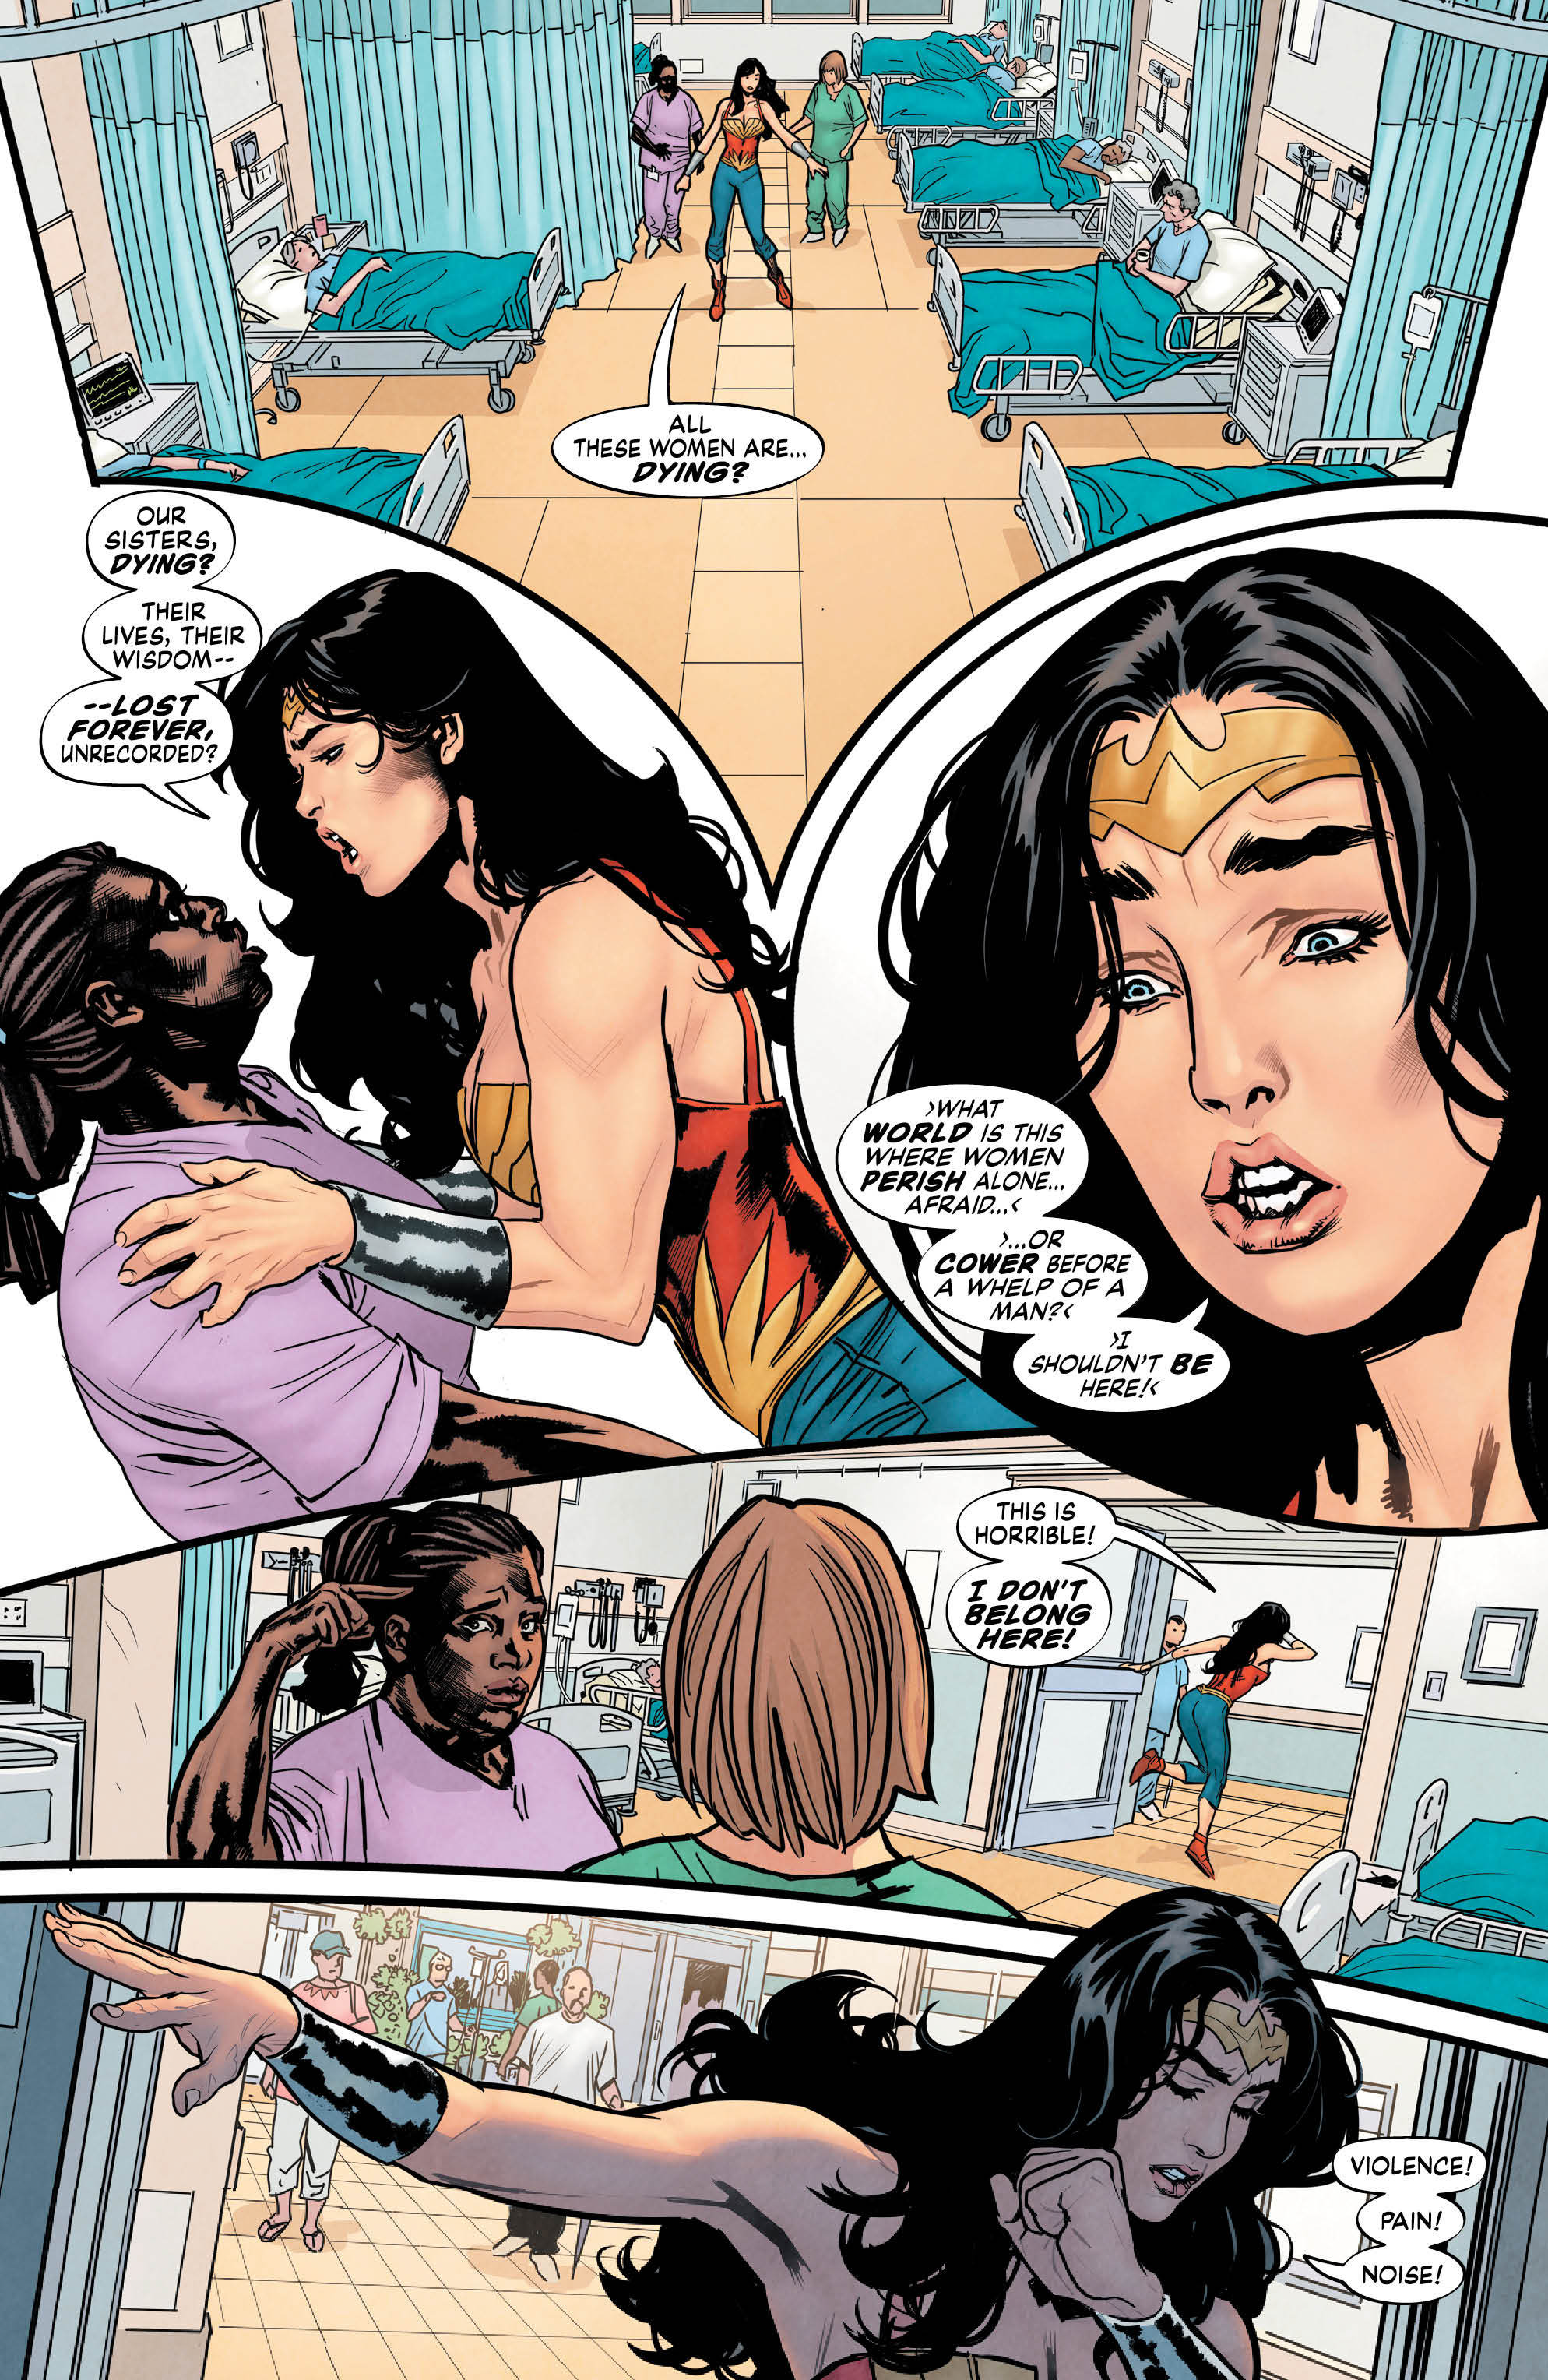 Wonder Woman Lesbian Sex Comics - Wonder Woman Is Sexy Again Thanks to Grant Morrison and ...